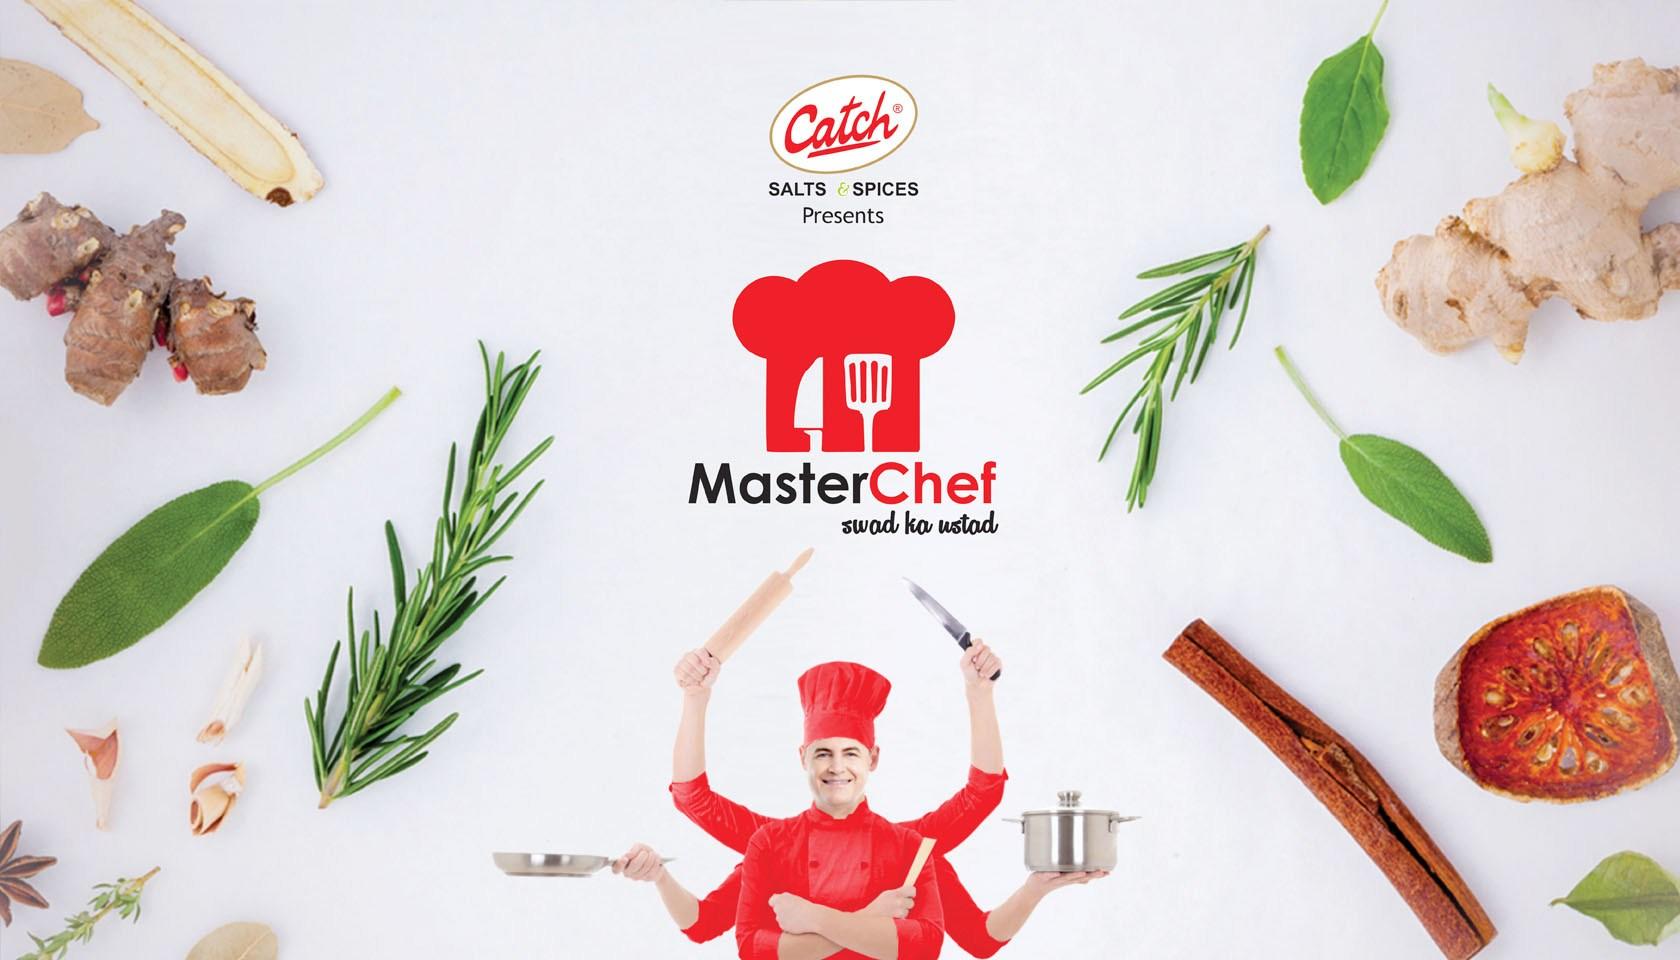 12 people selected for Finals in Master Chef auditions